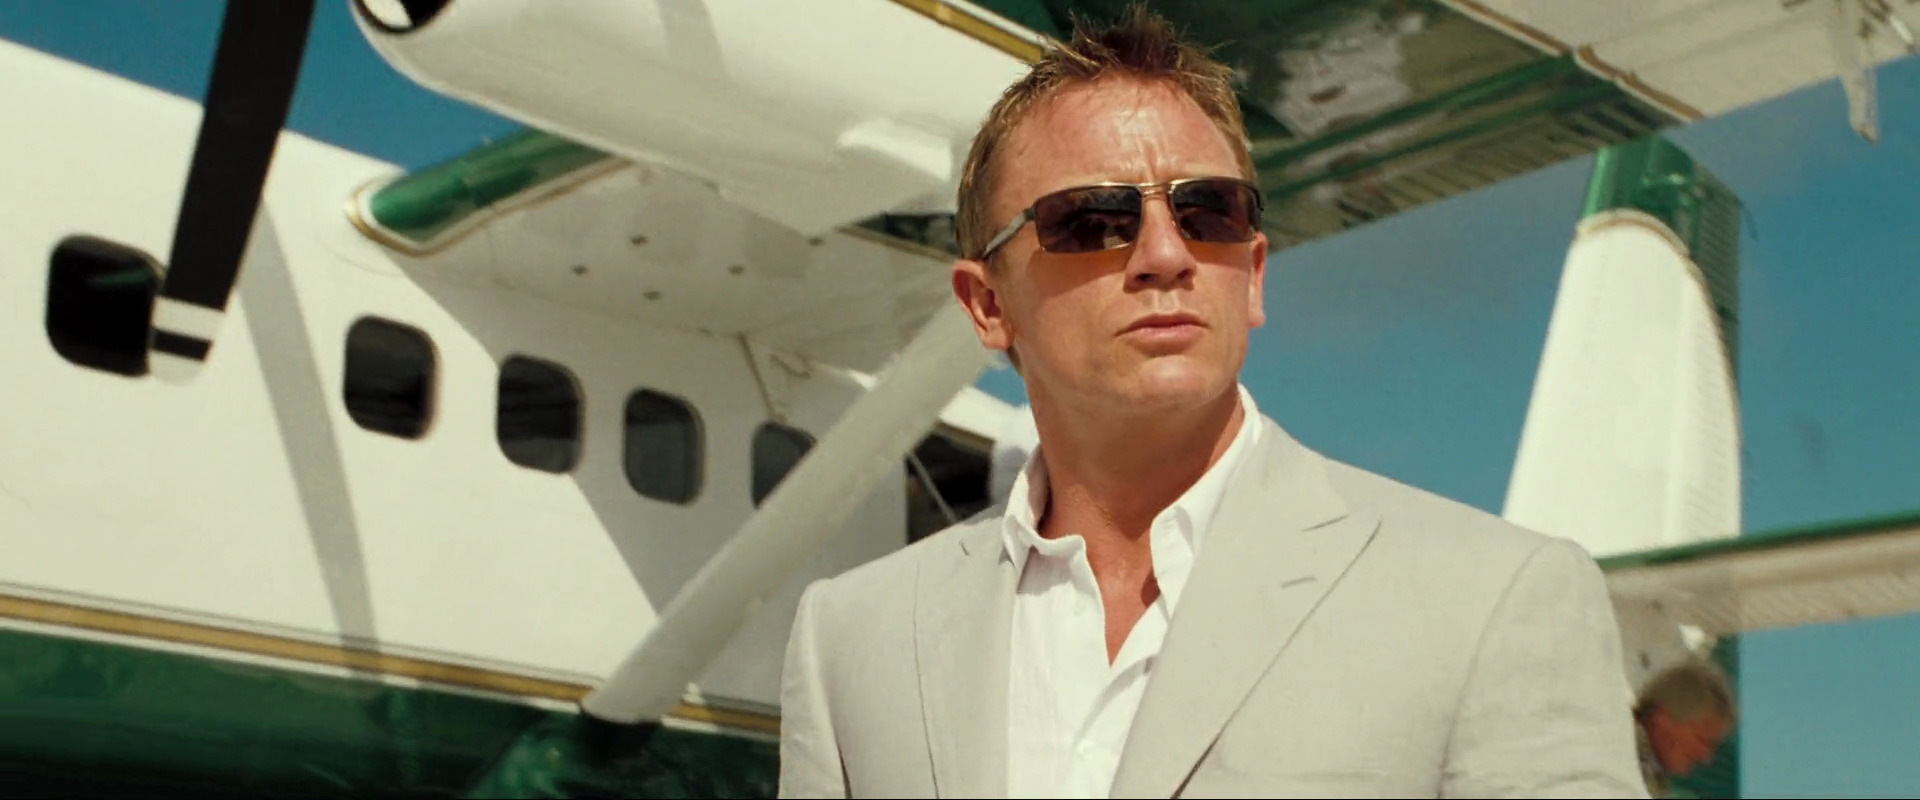 Our 15 Favorite Outfits From Daniel Craig's James Bond Primer